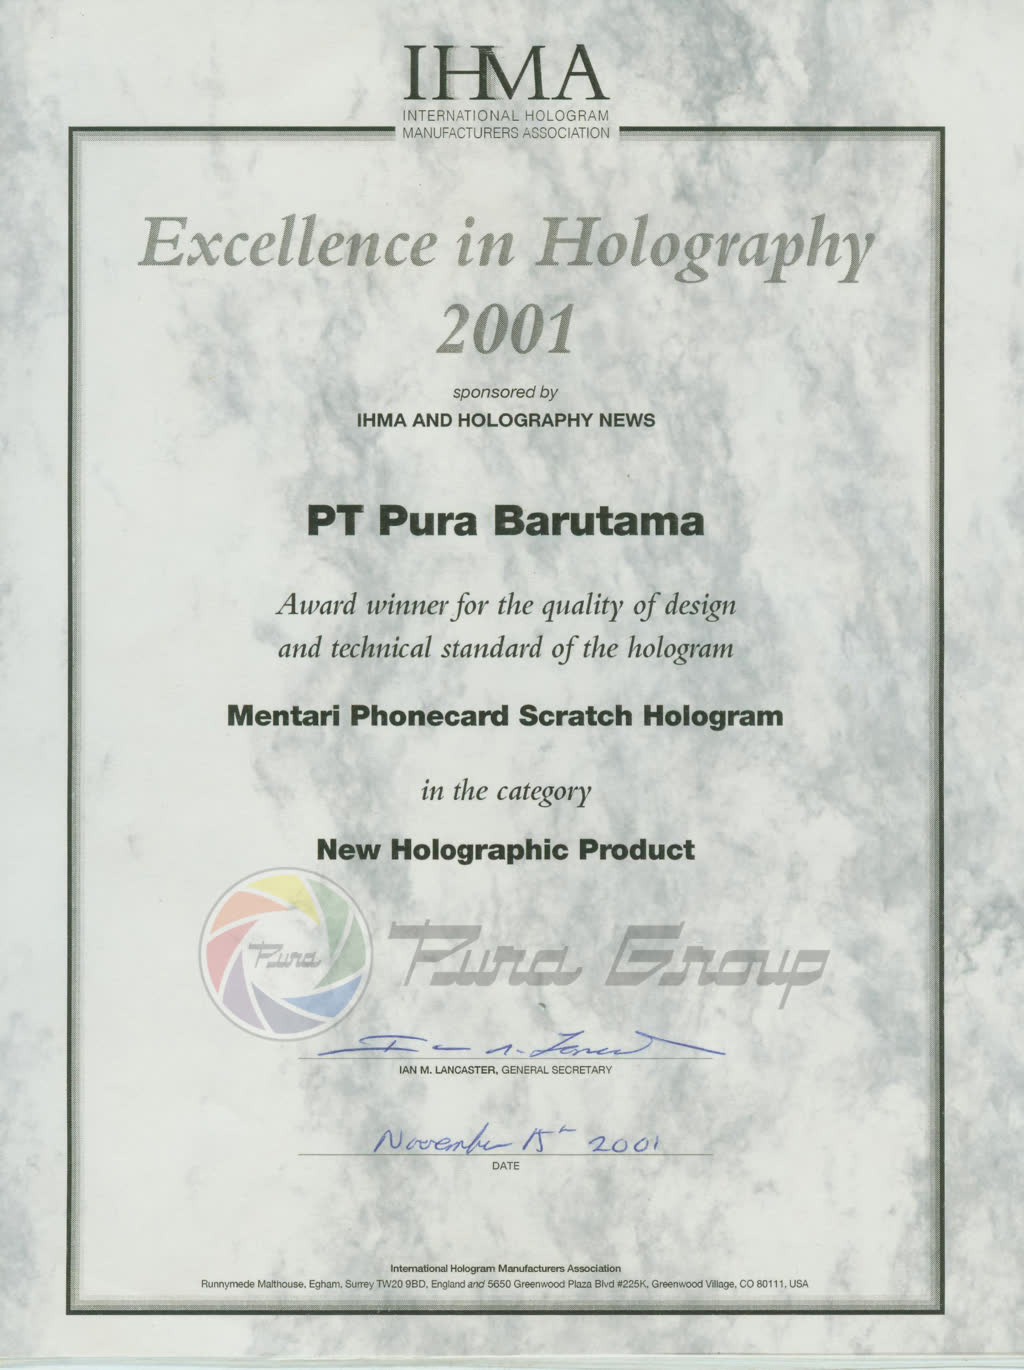 IHMA AWARD 2001FOR NEW HOLOGRAPHIC PRODUCT